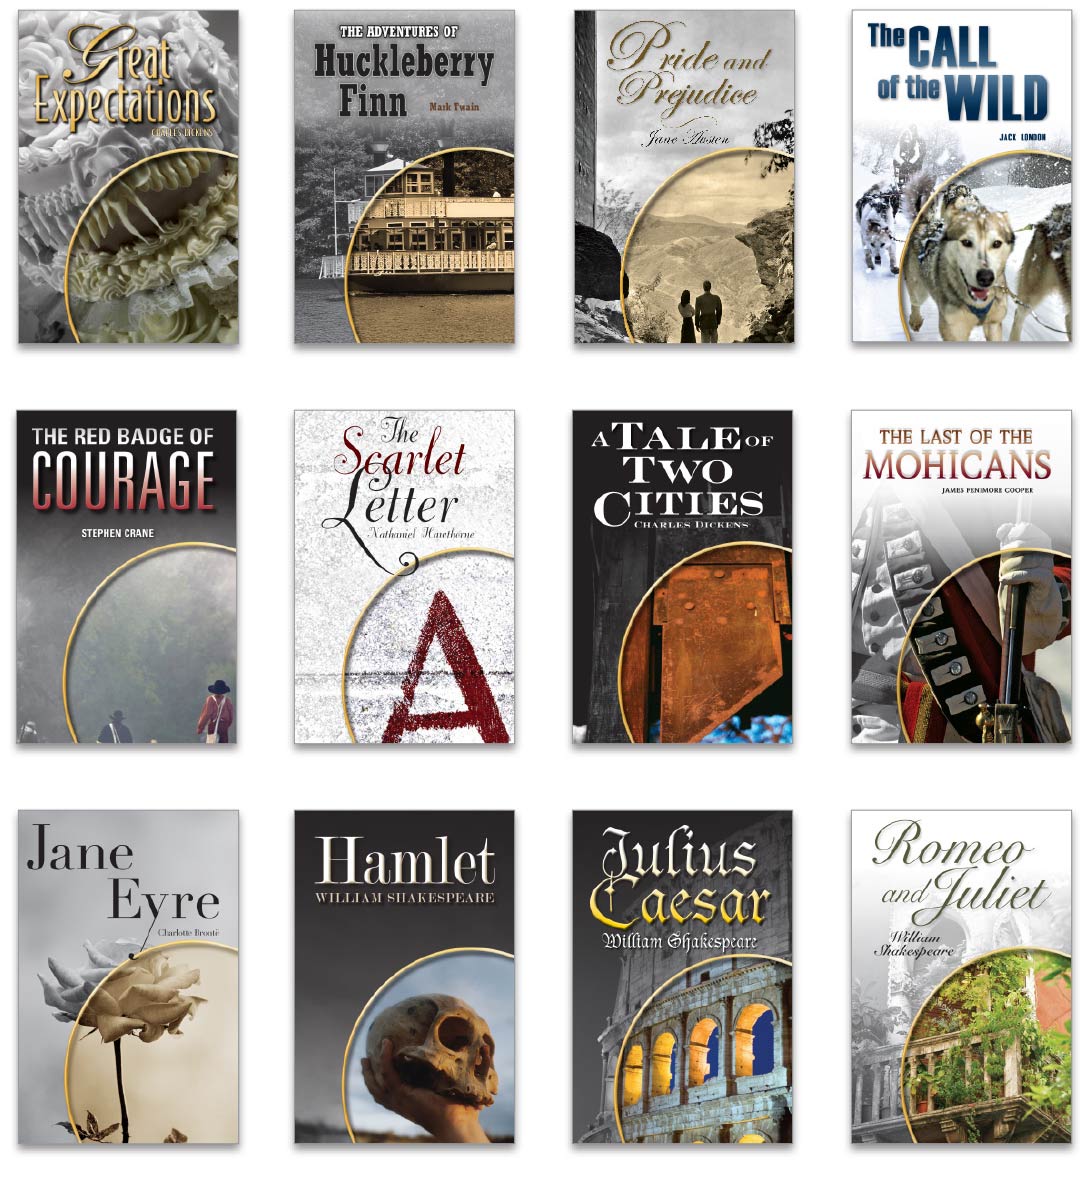 Image with the front covers of 12 of n2y's differentiated Classics titles, including novels and plays